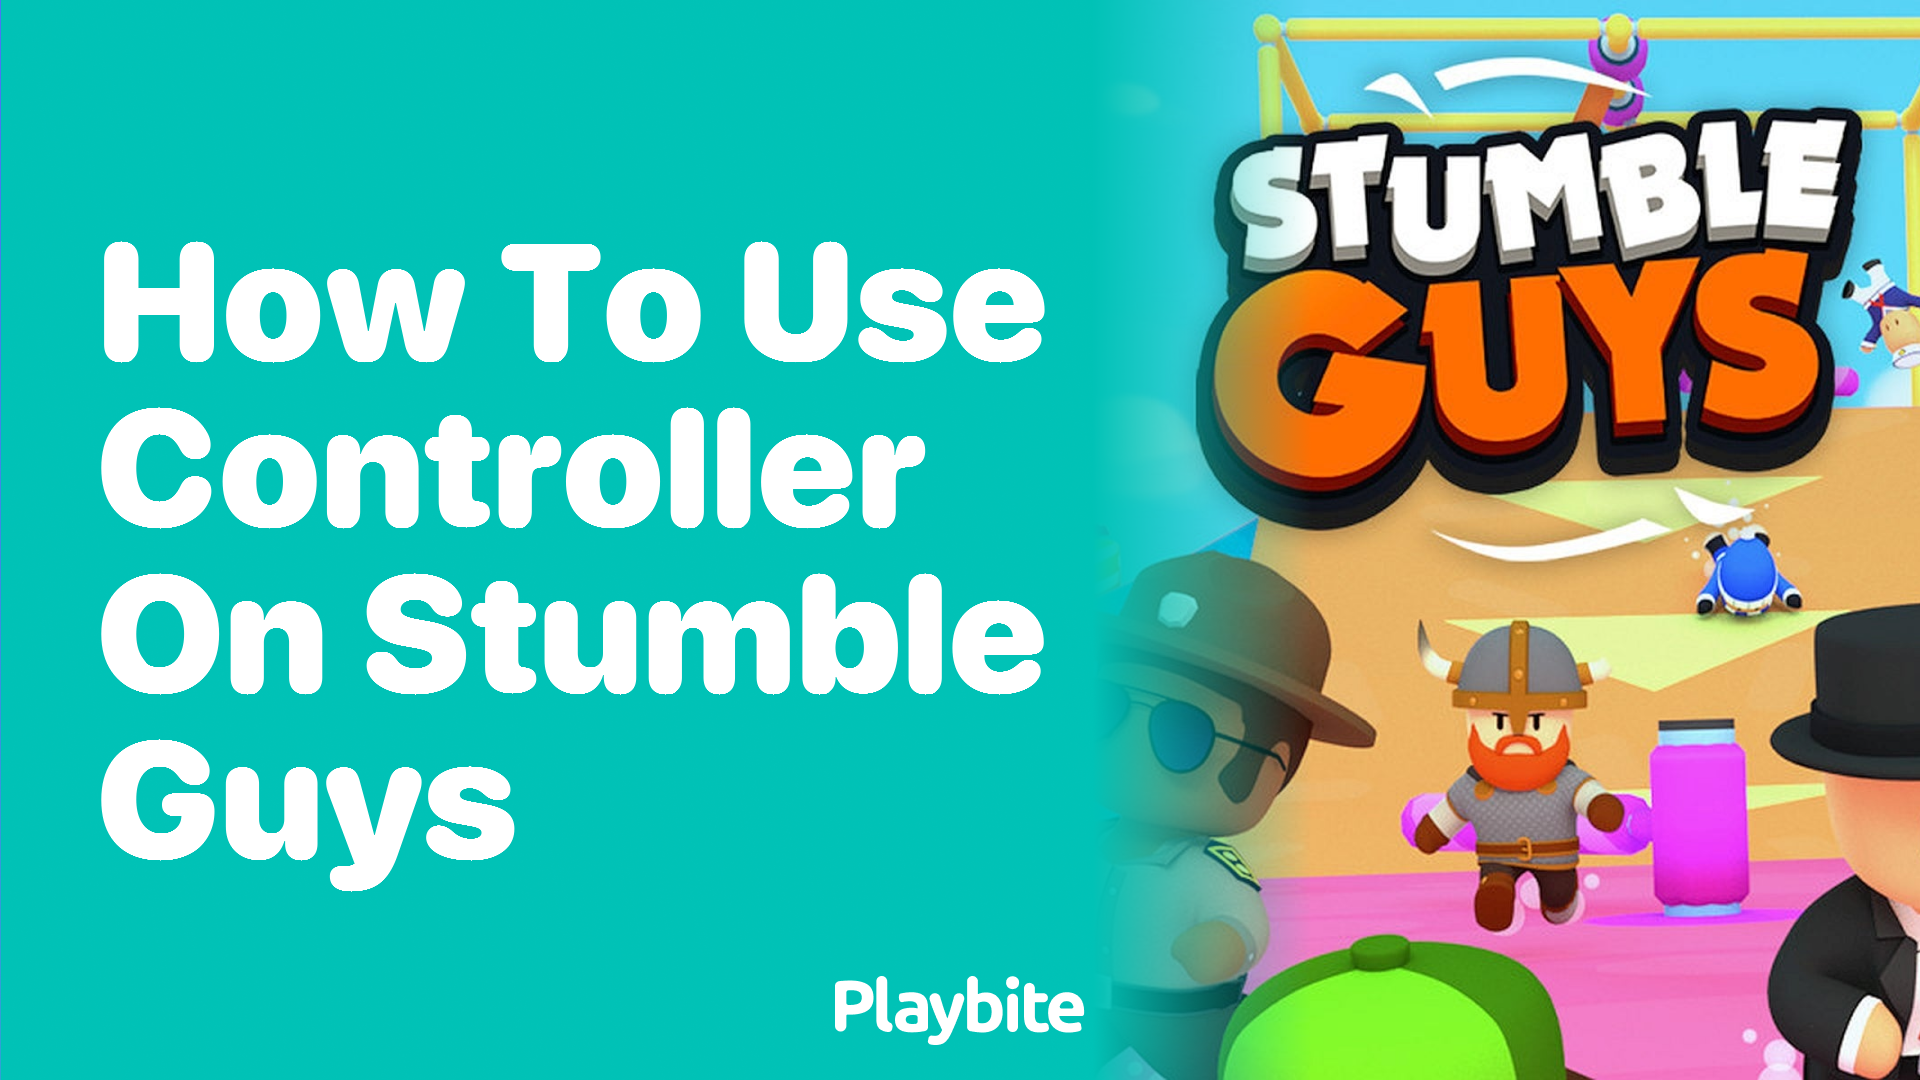 How to Use a Controller on Stumble Guys